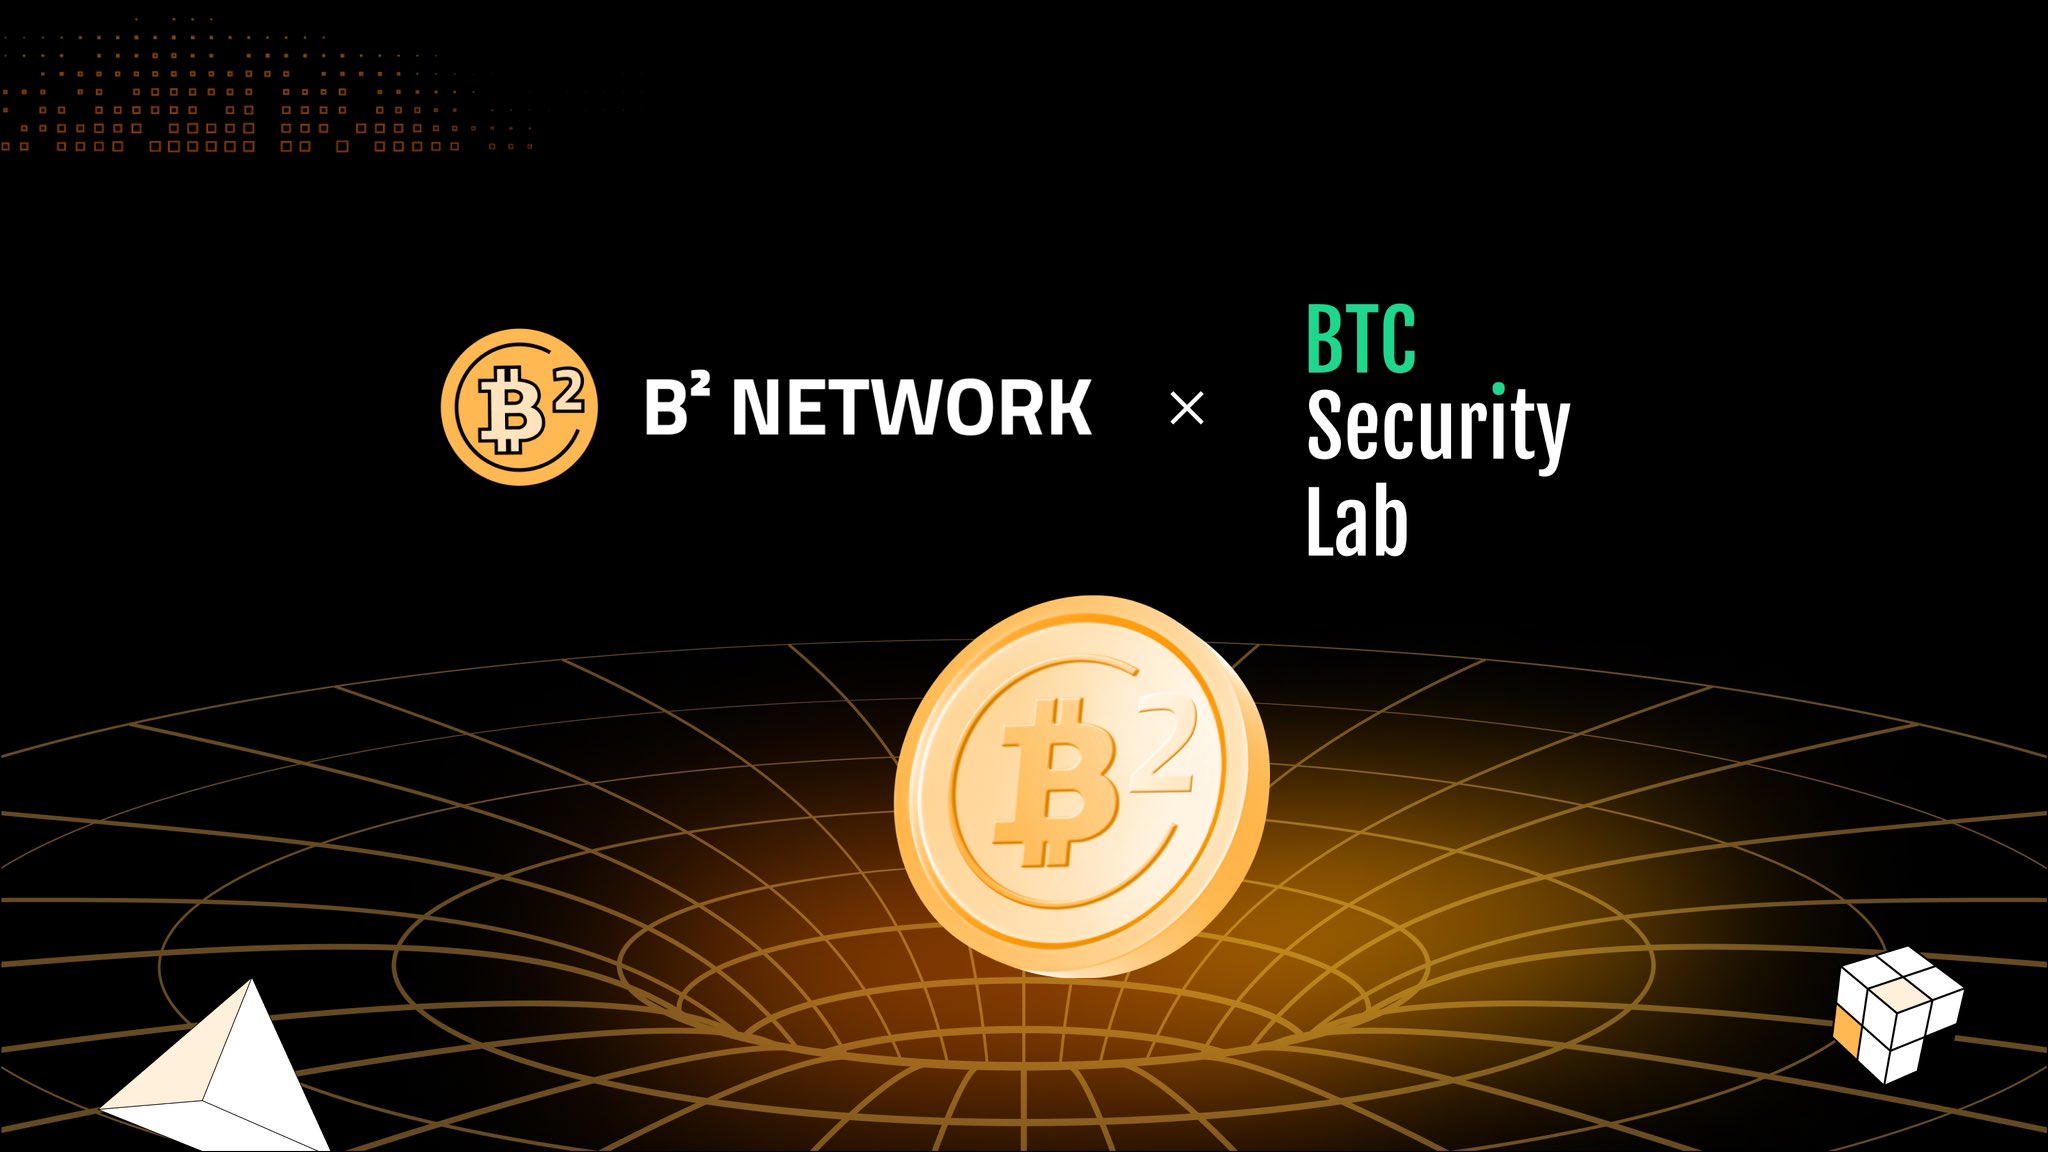 btc-security-lab-and-b2-network